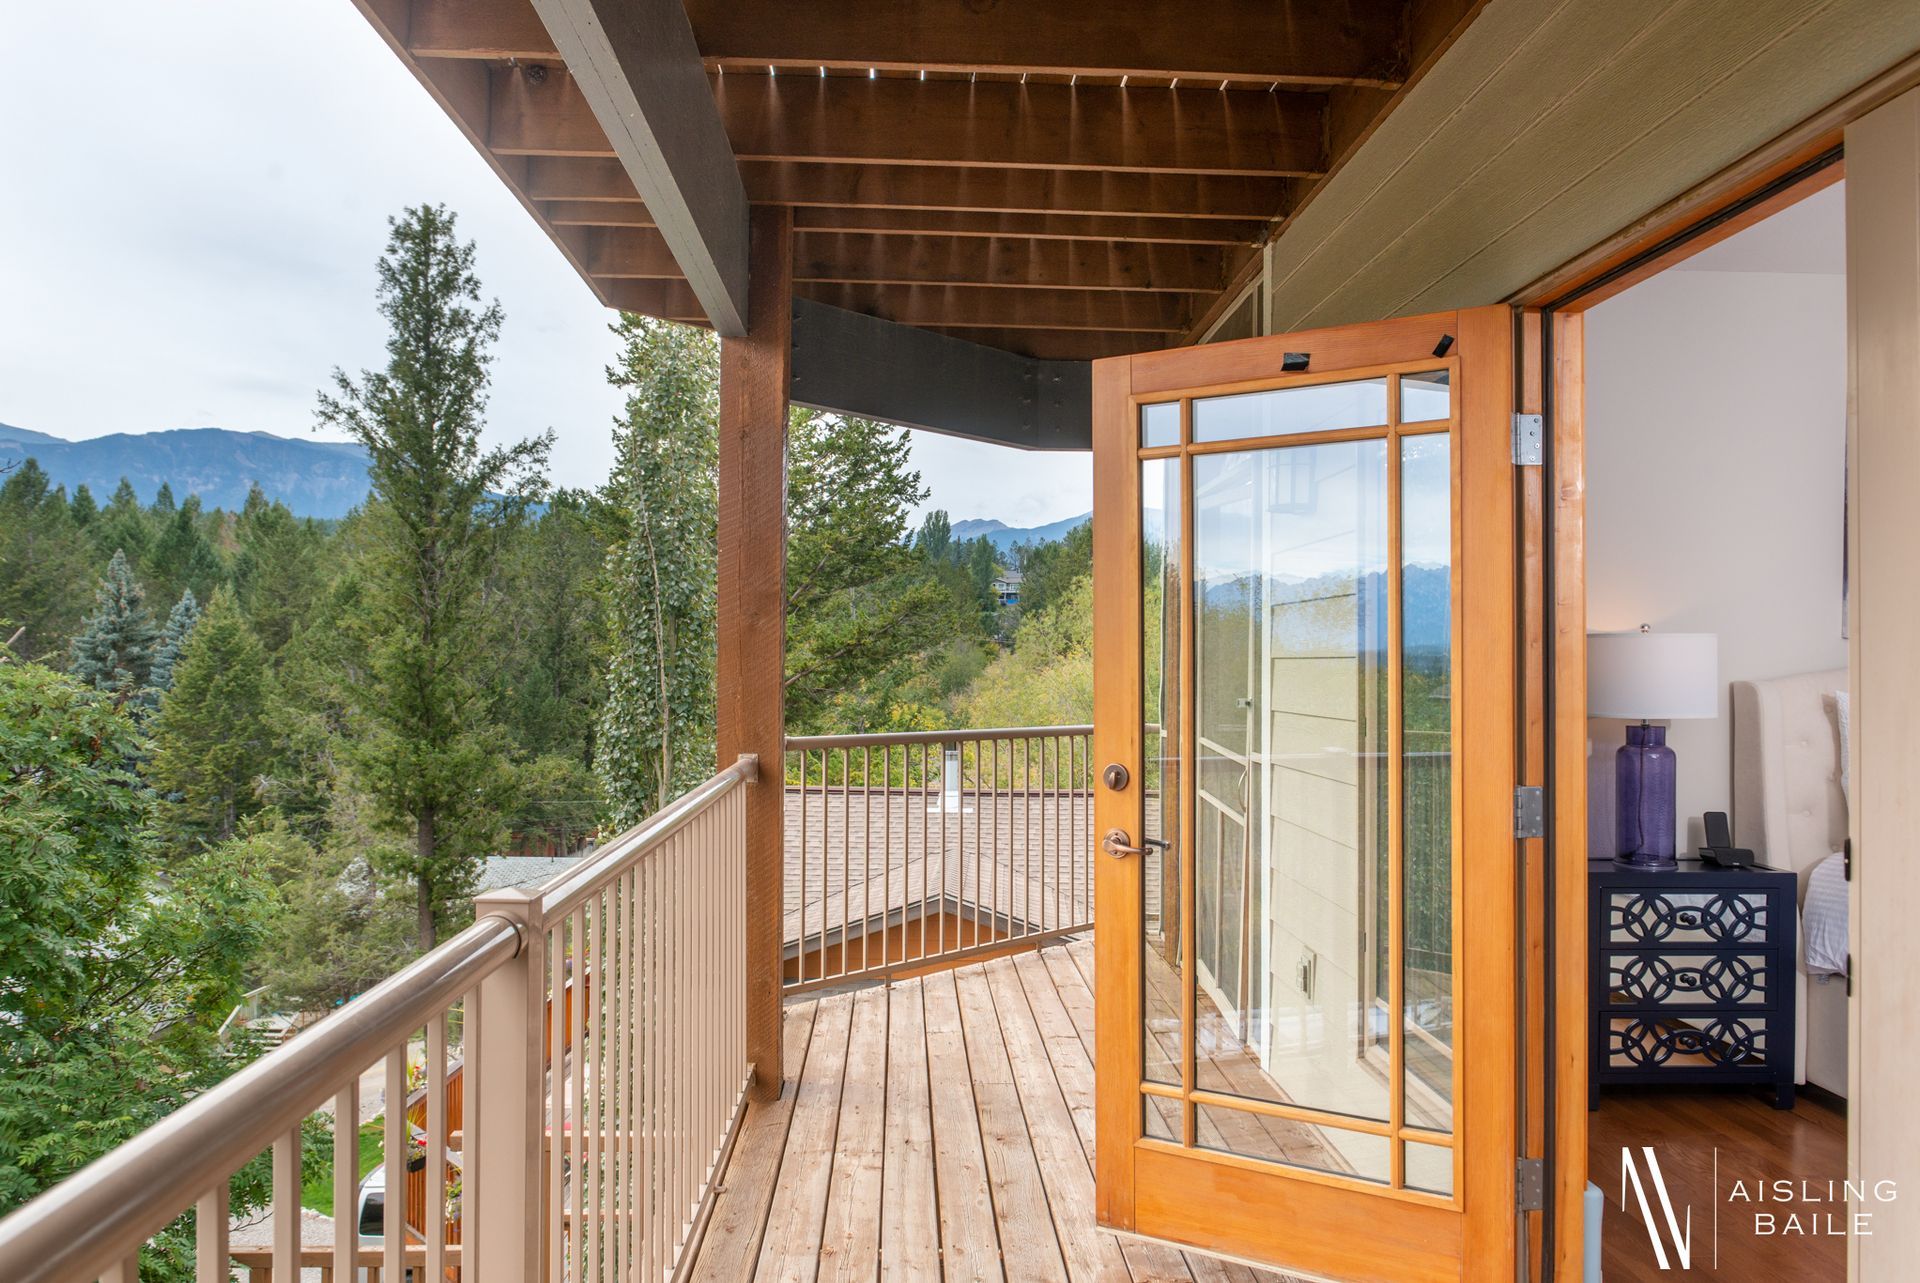 Private patio with lake and mountain views from Central Elegance, an Invermere BC Vacation Rental hosted by Aisling Baile Property Management.